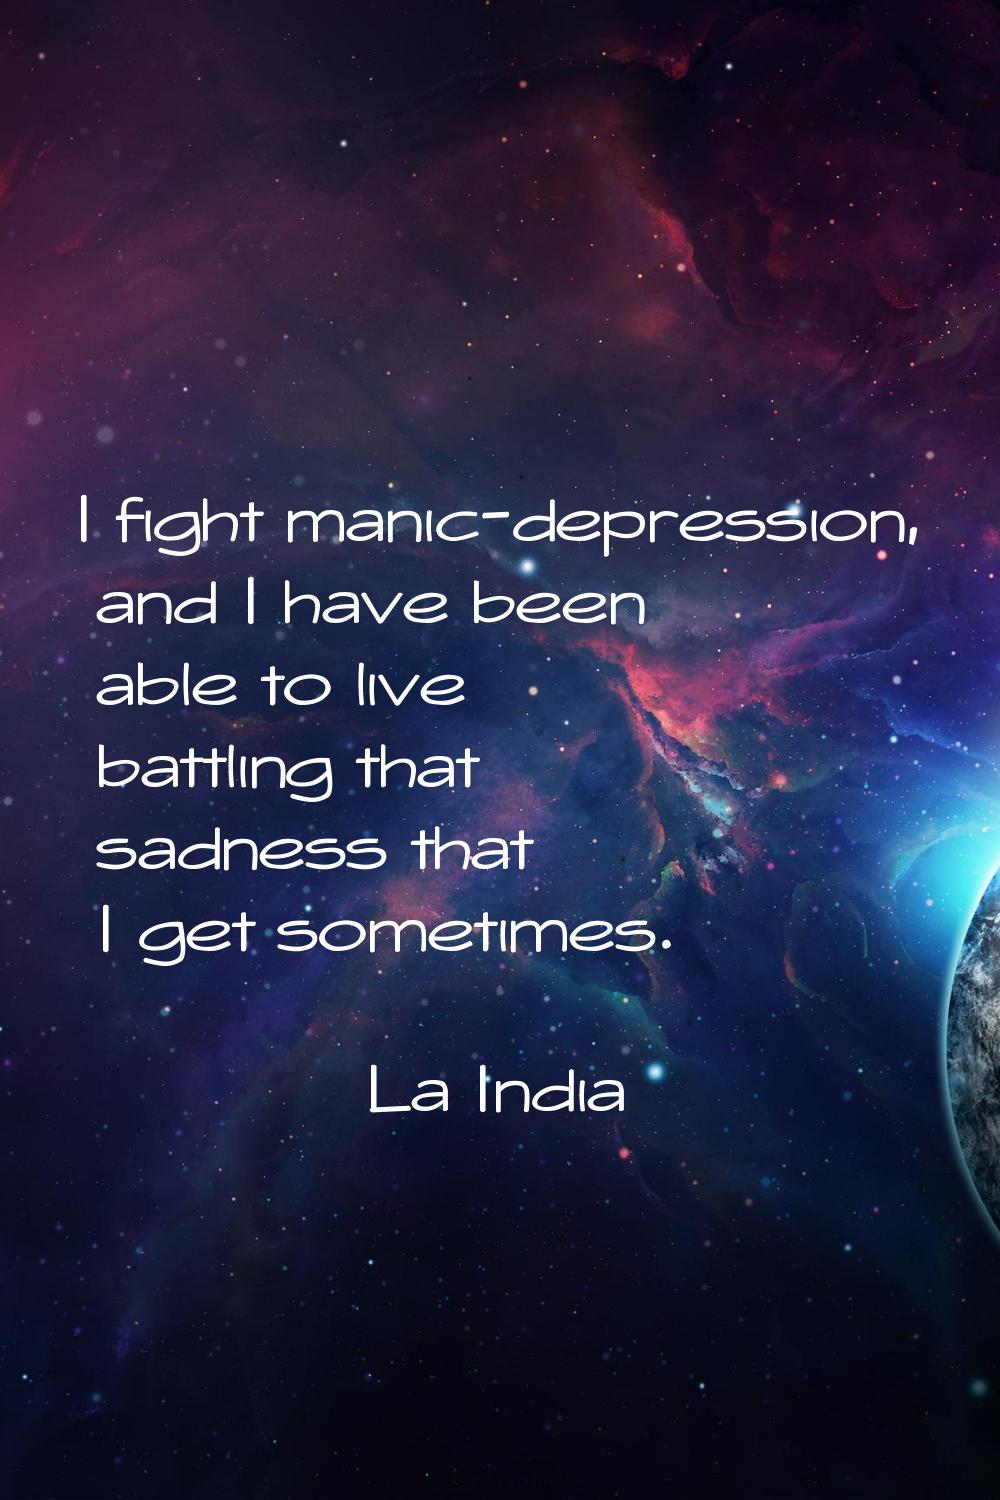 I fight manic-depression, and I have been able to live battling that sadness that I get sometimes.